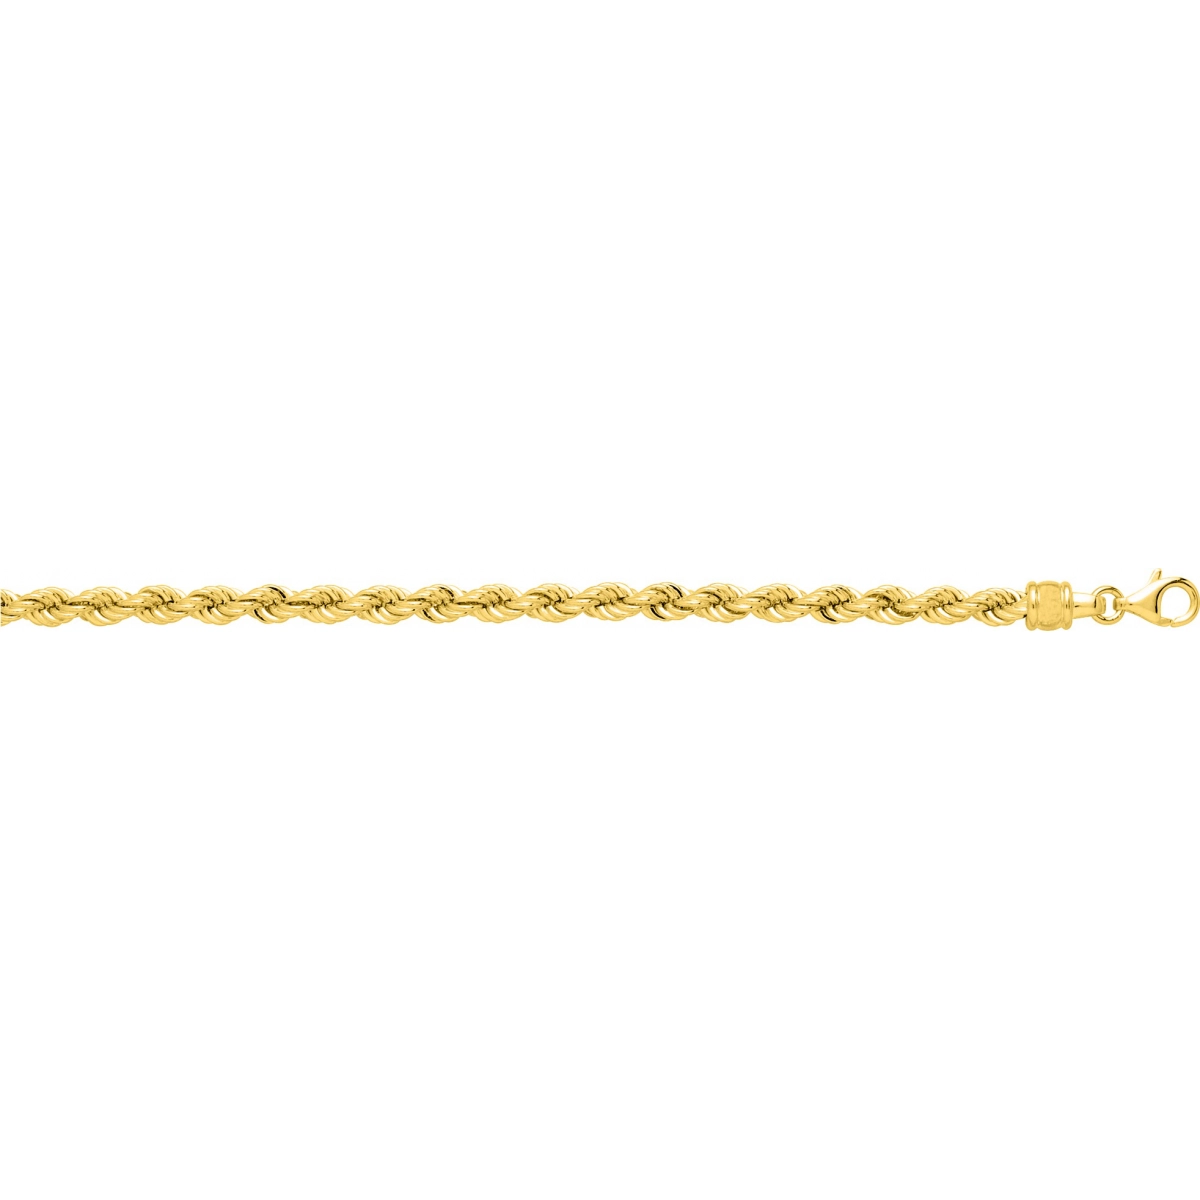 Bracelet with cord gold plated Brass - Size: 19  Lua Blanca  101466B.19